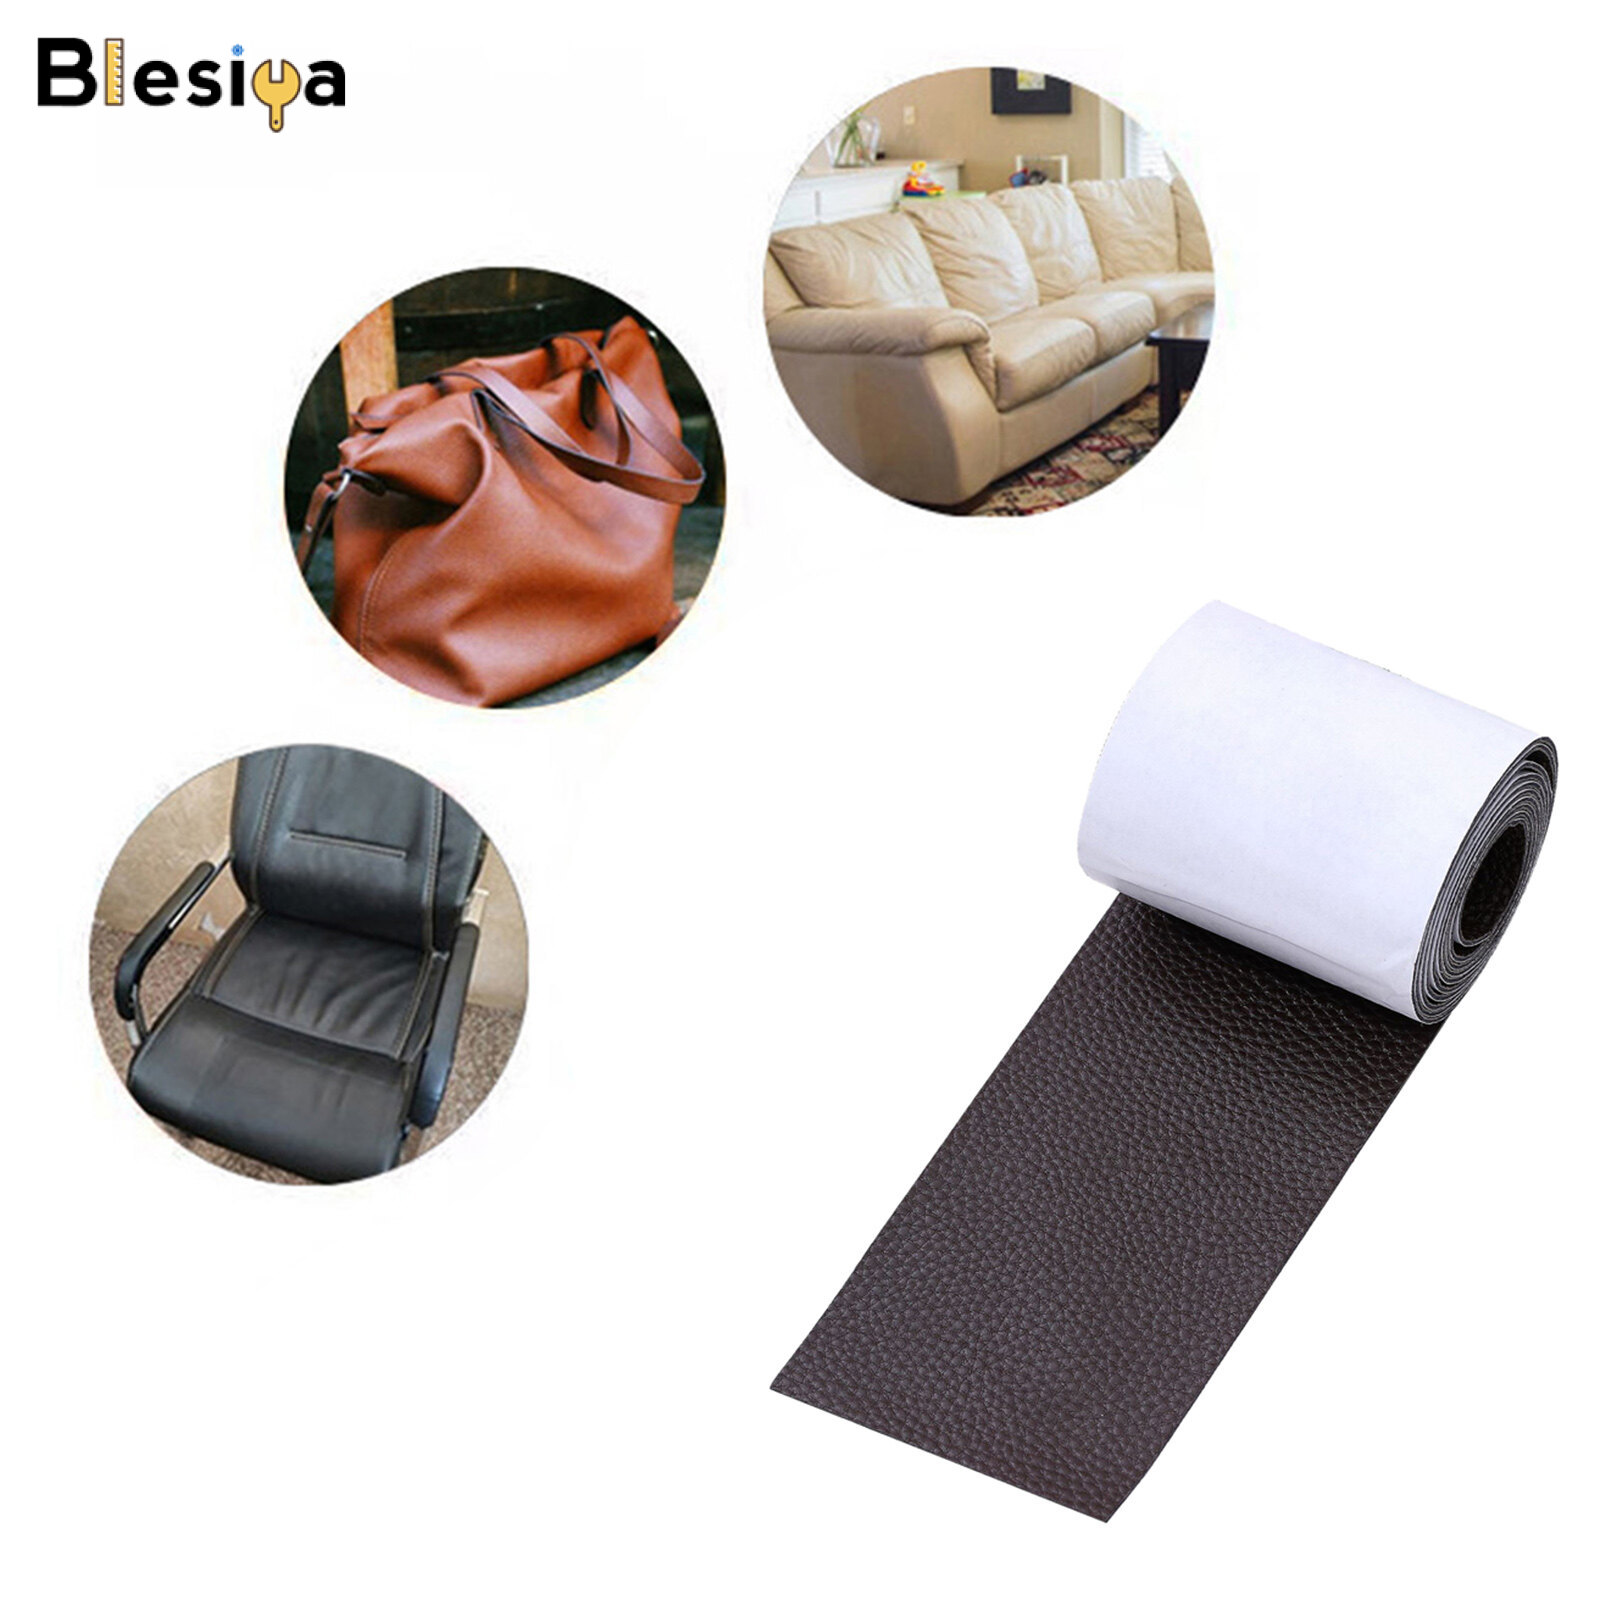 Blesiya Leather Tape Repair Patch DIY Car Seat Patch Sofa Couch Furniture